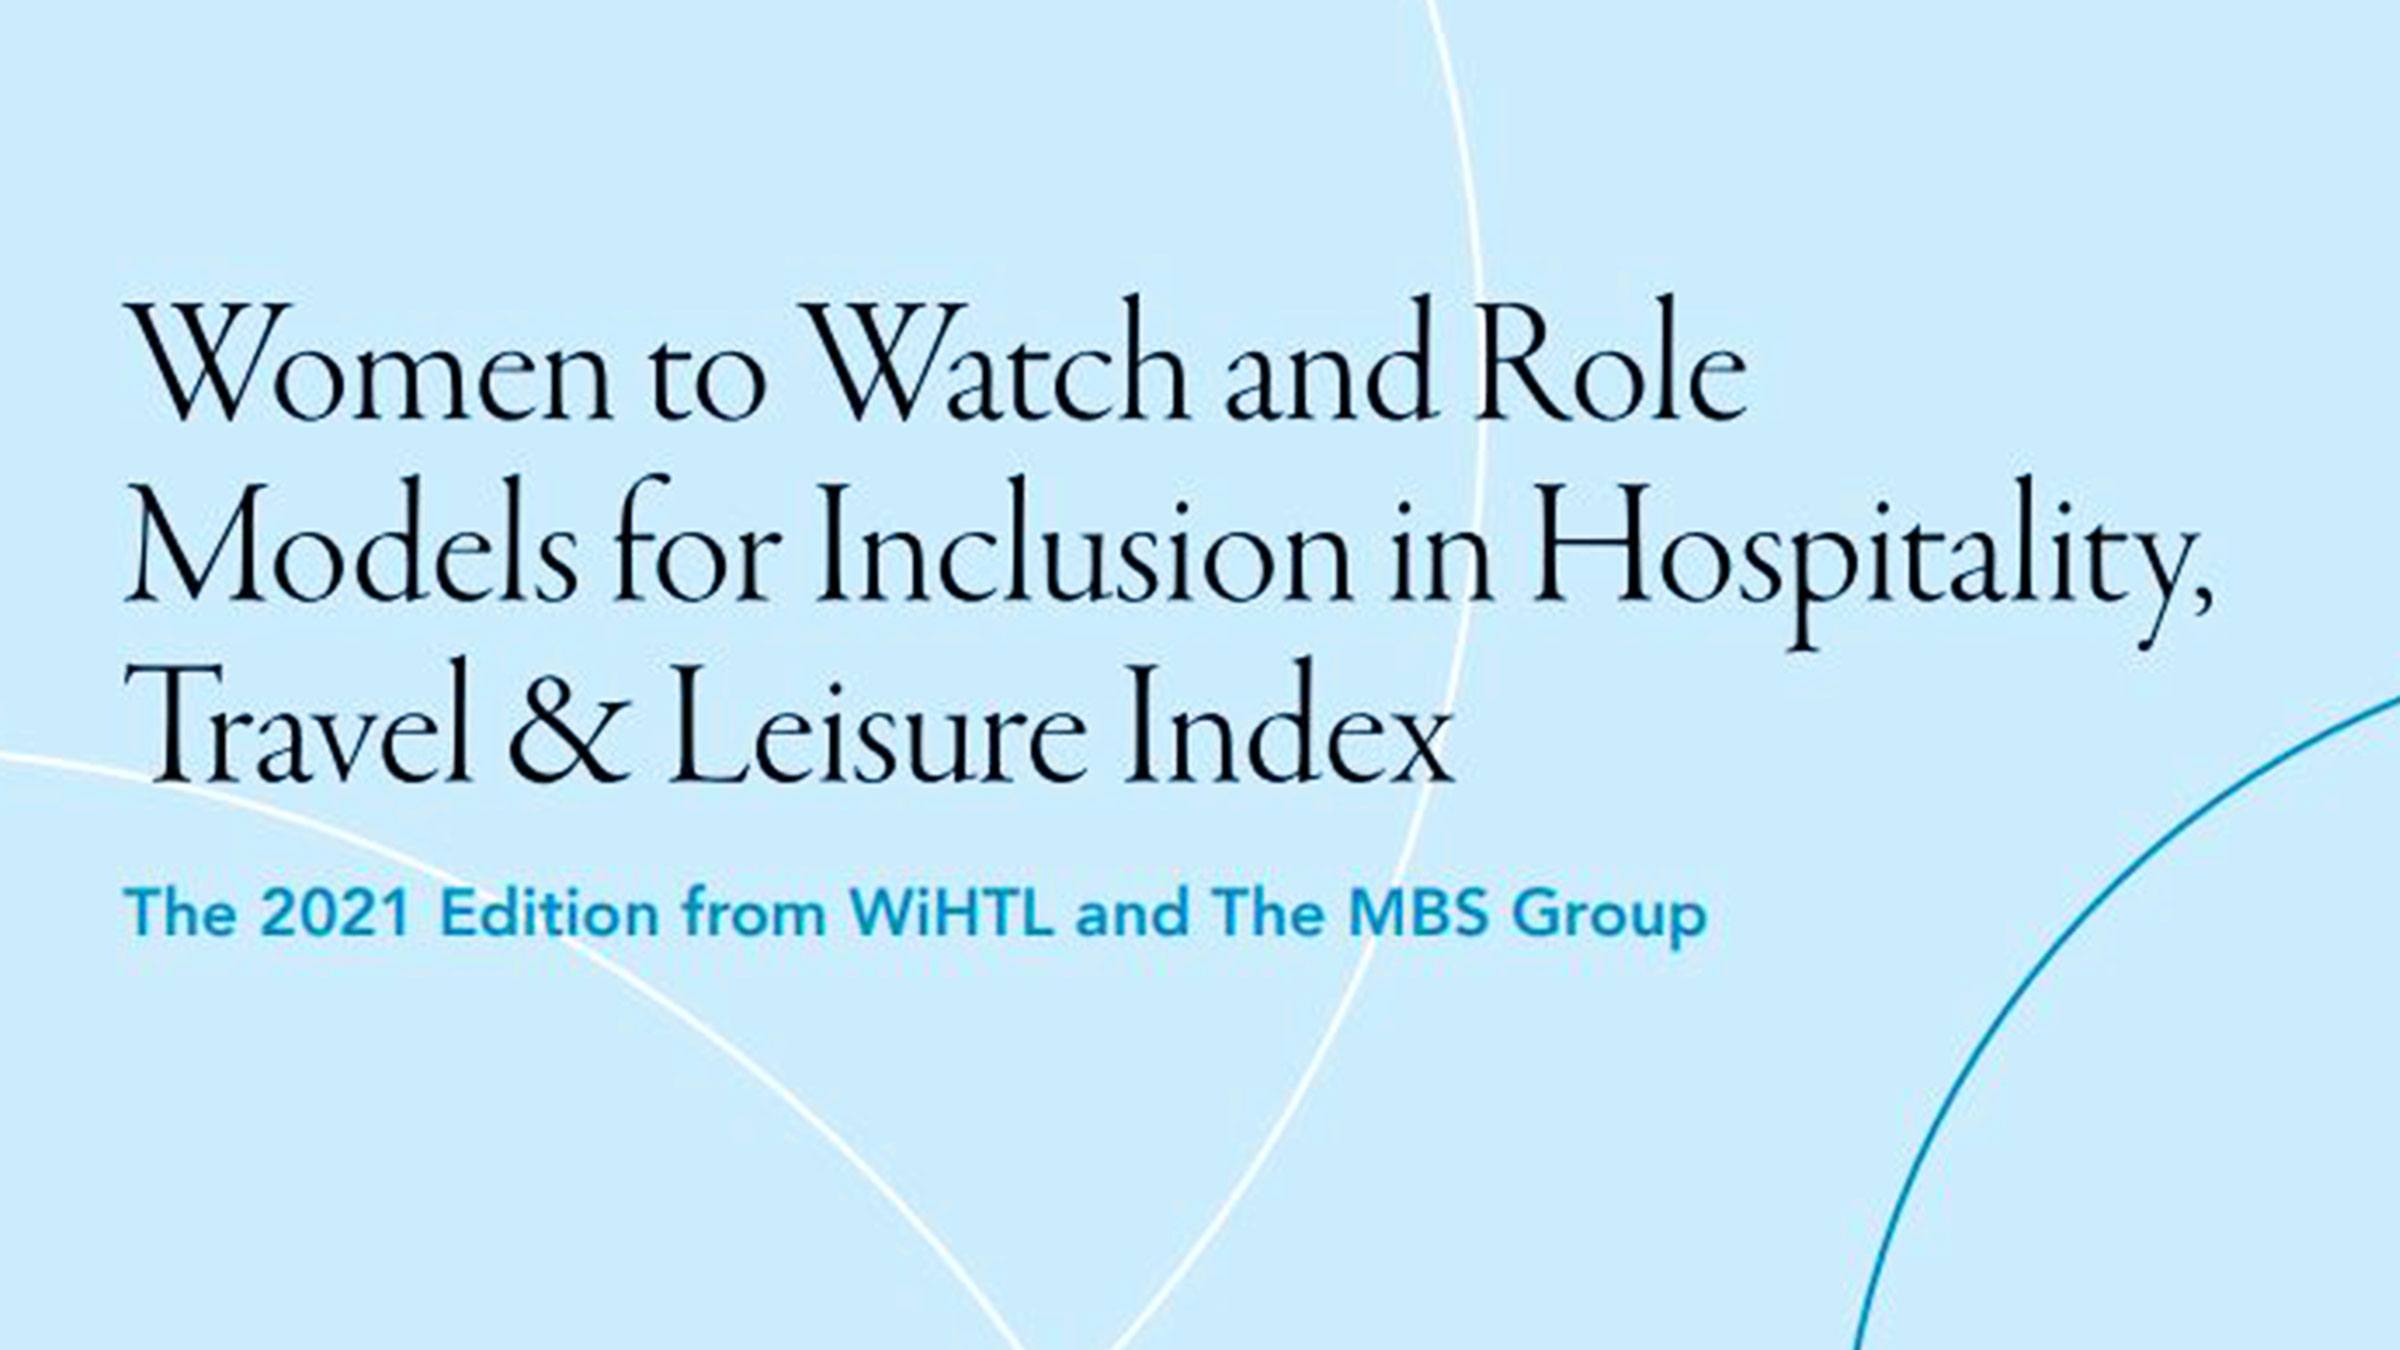 Women to Watch and Role Models for Inclusion in Hospitality, Travel and Leisure